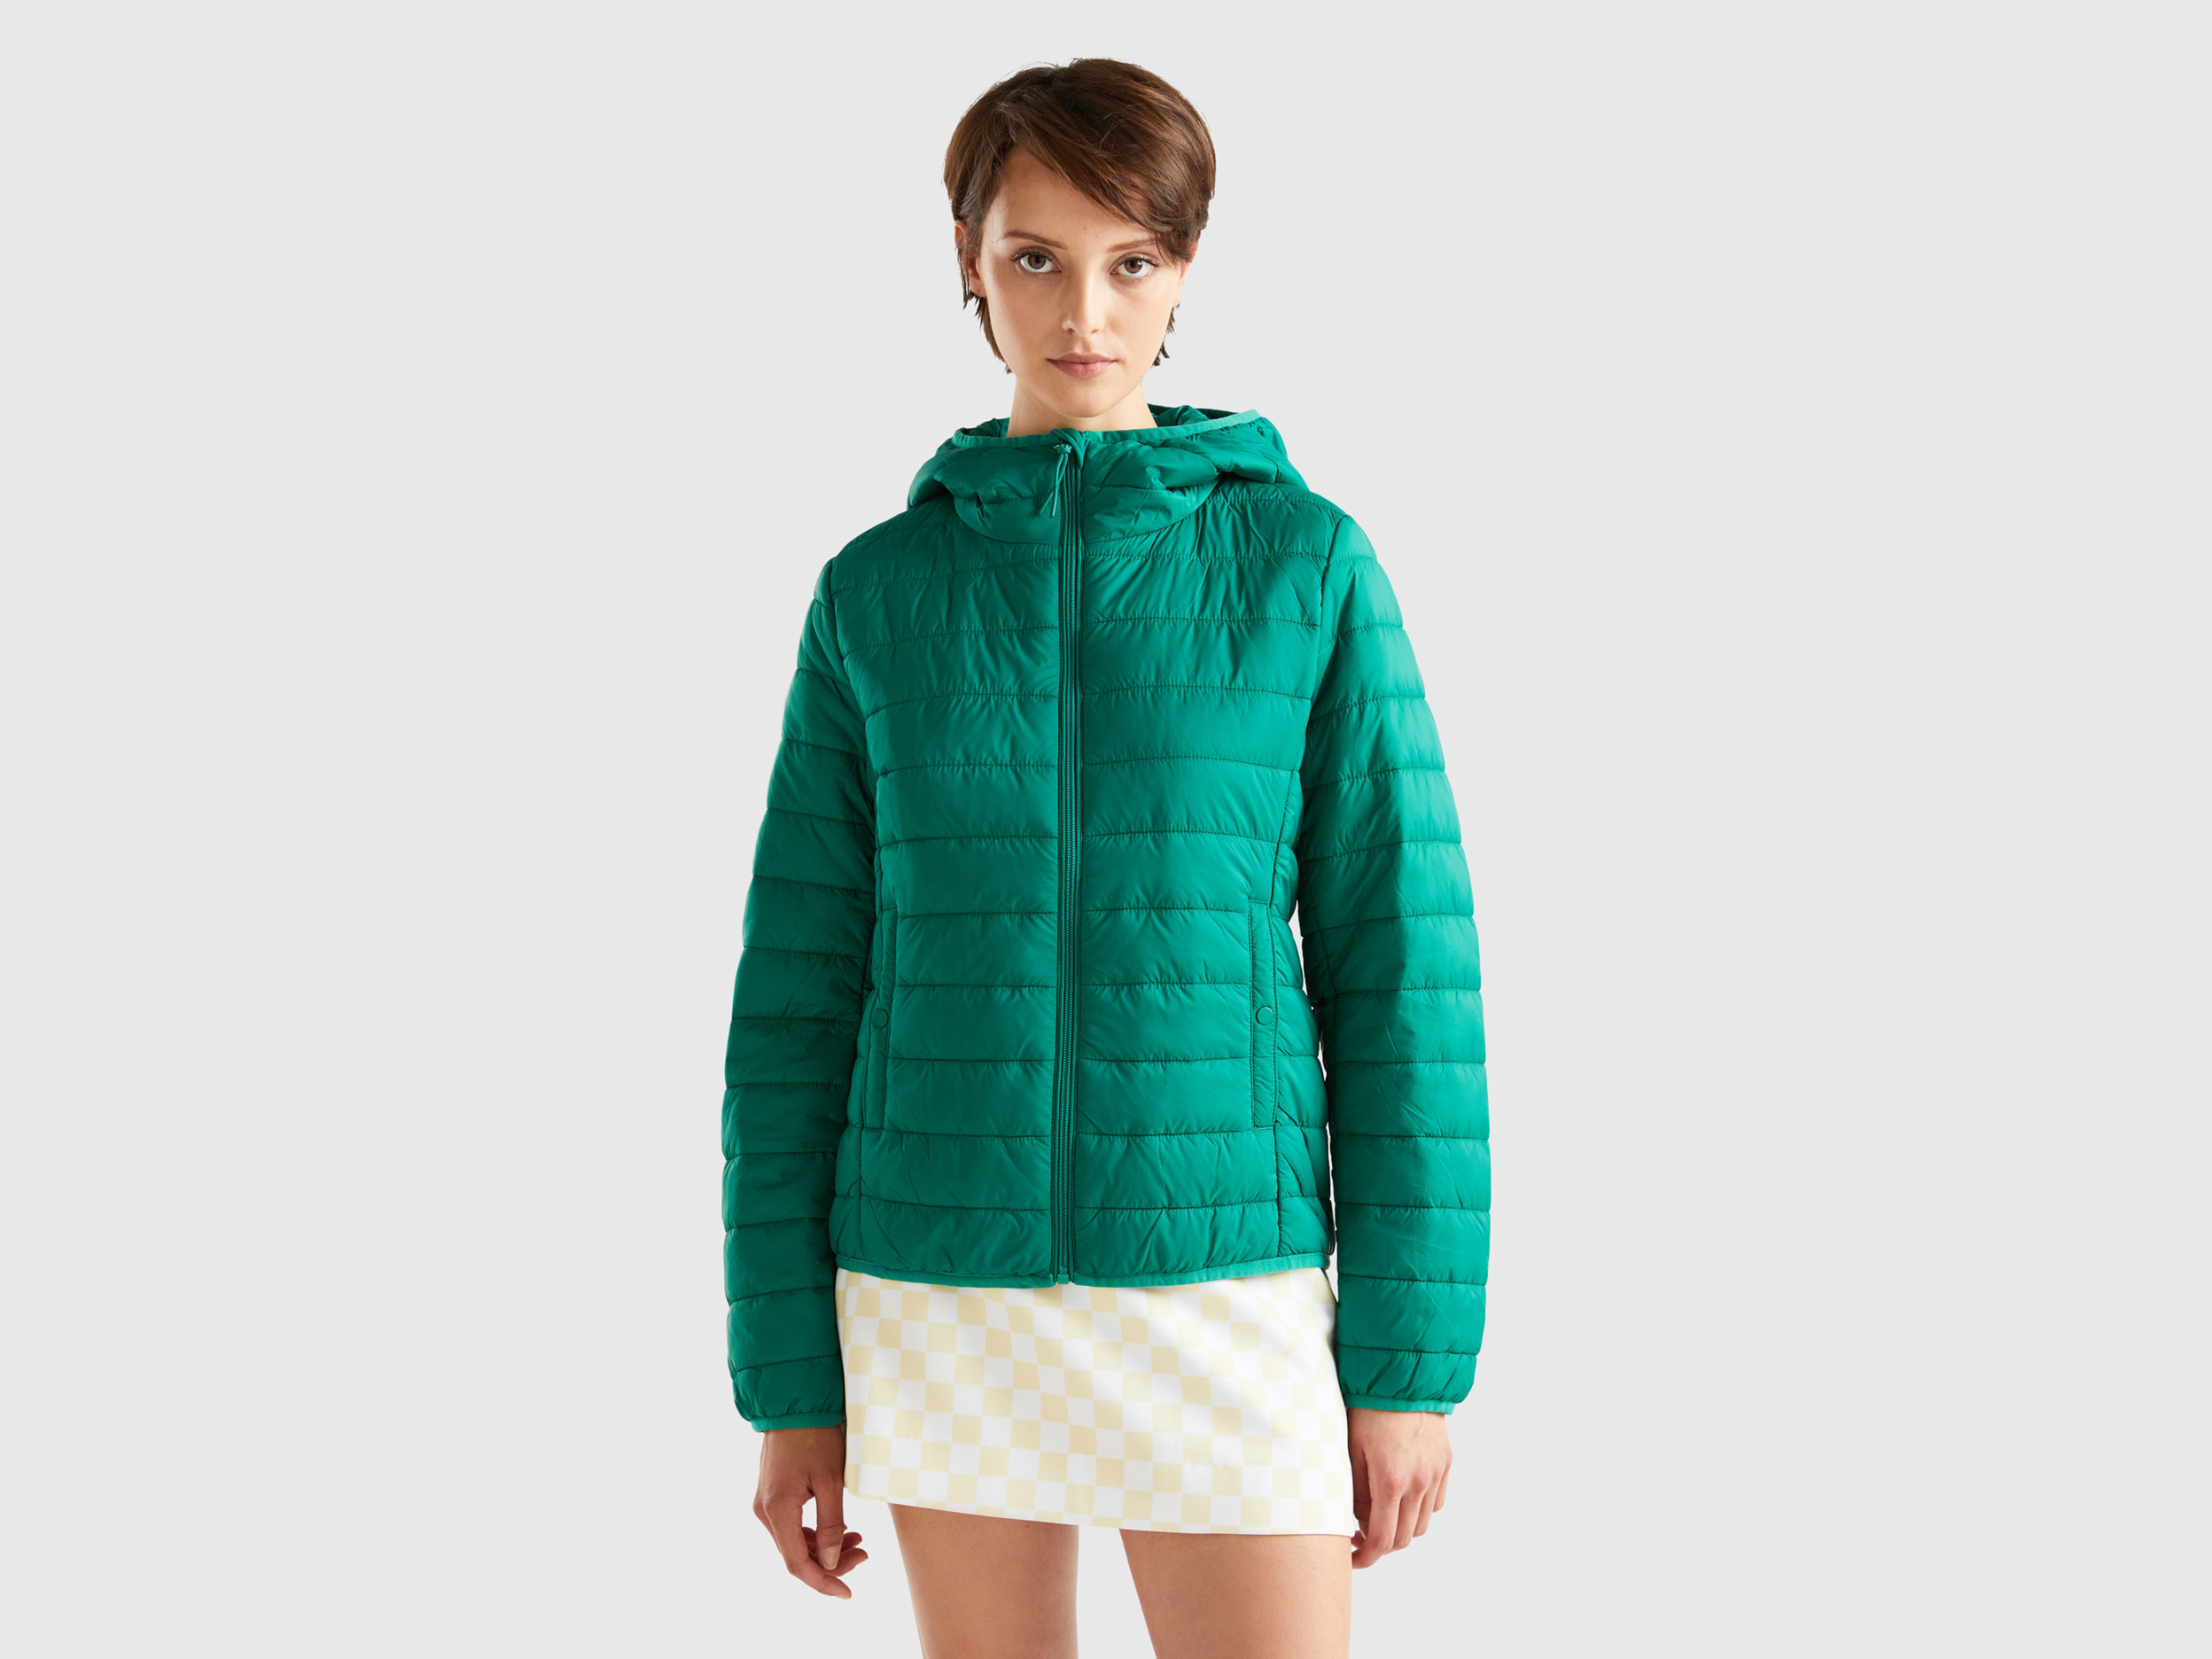 Benetton, Puffer Jacket With Recycled Wadding, size S, Green, Women